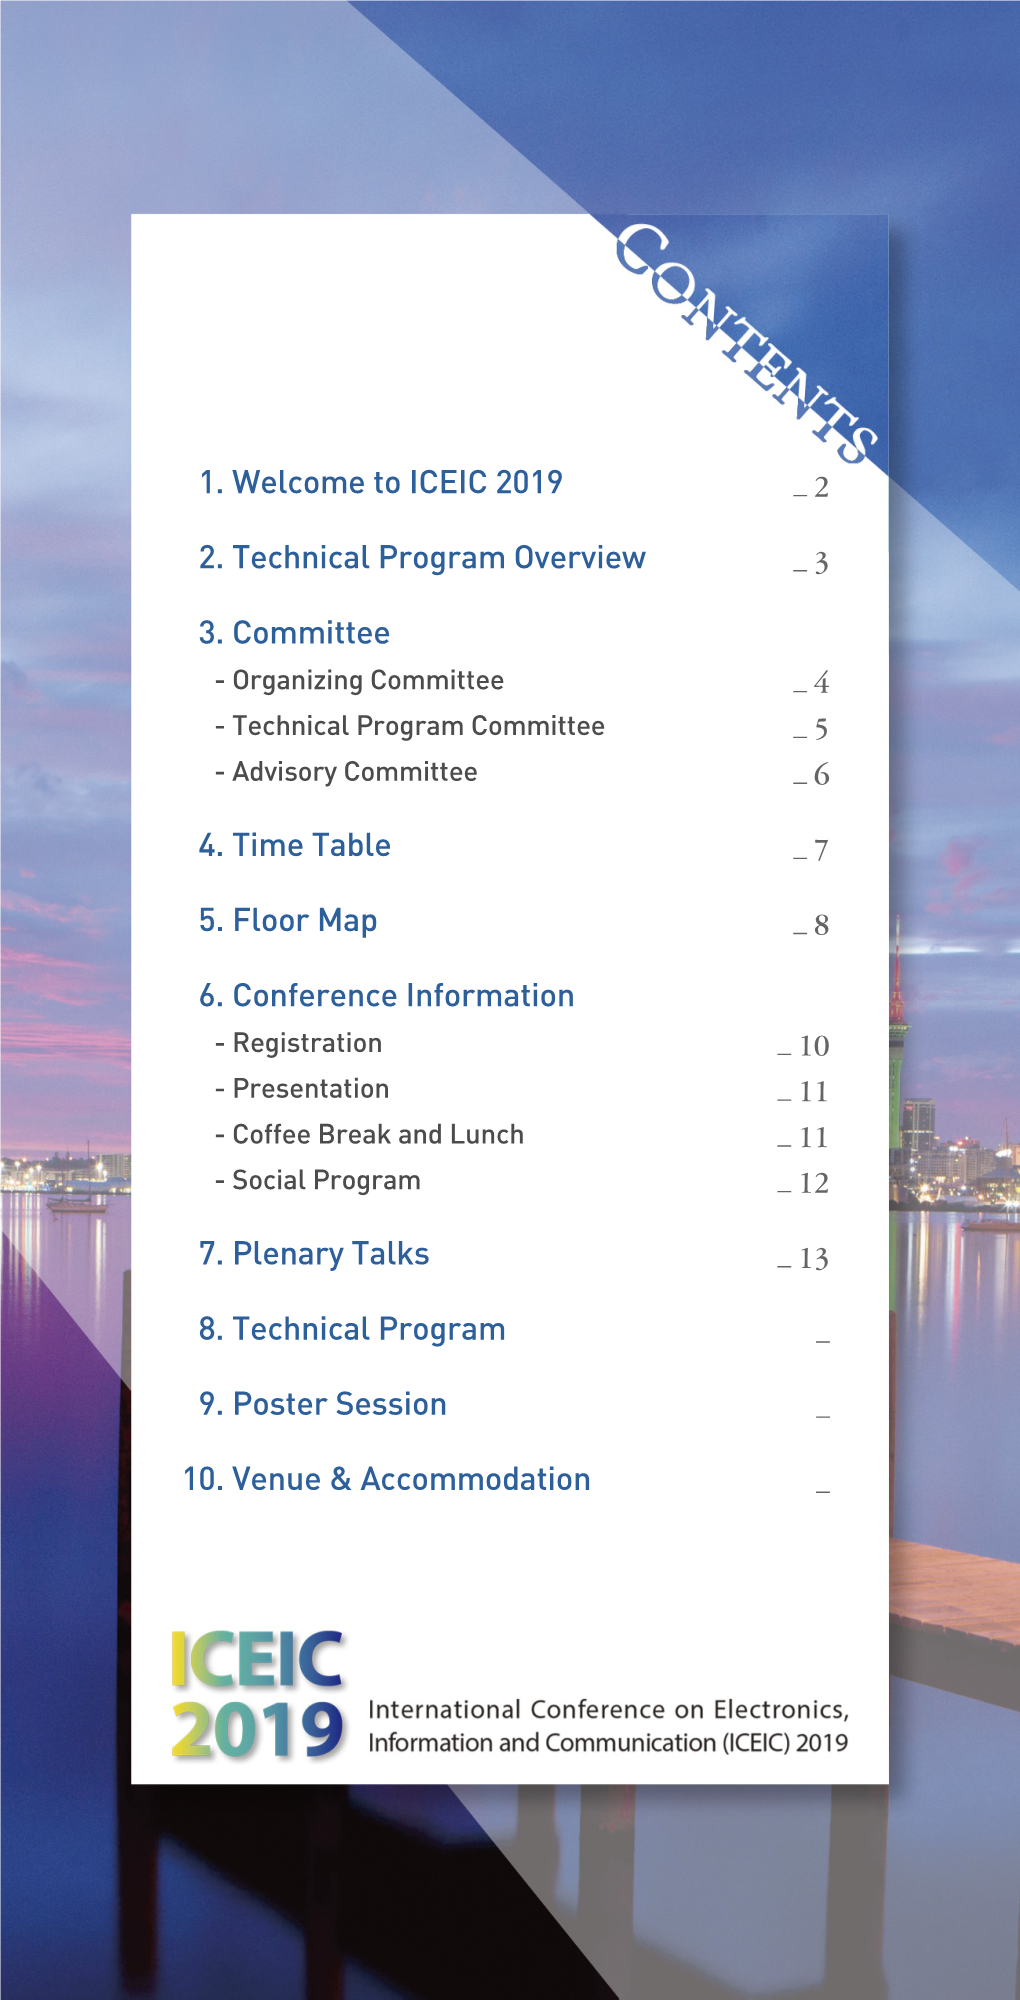 1. Welcome to ICEIC 2019 2. Technical Program Overview 3